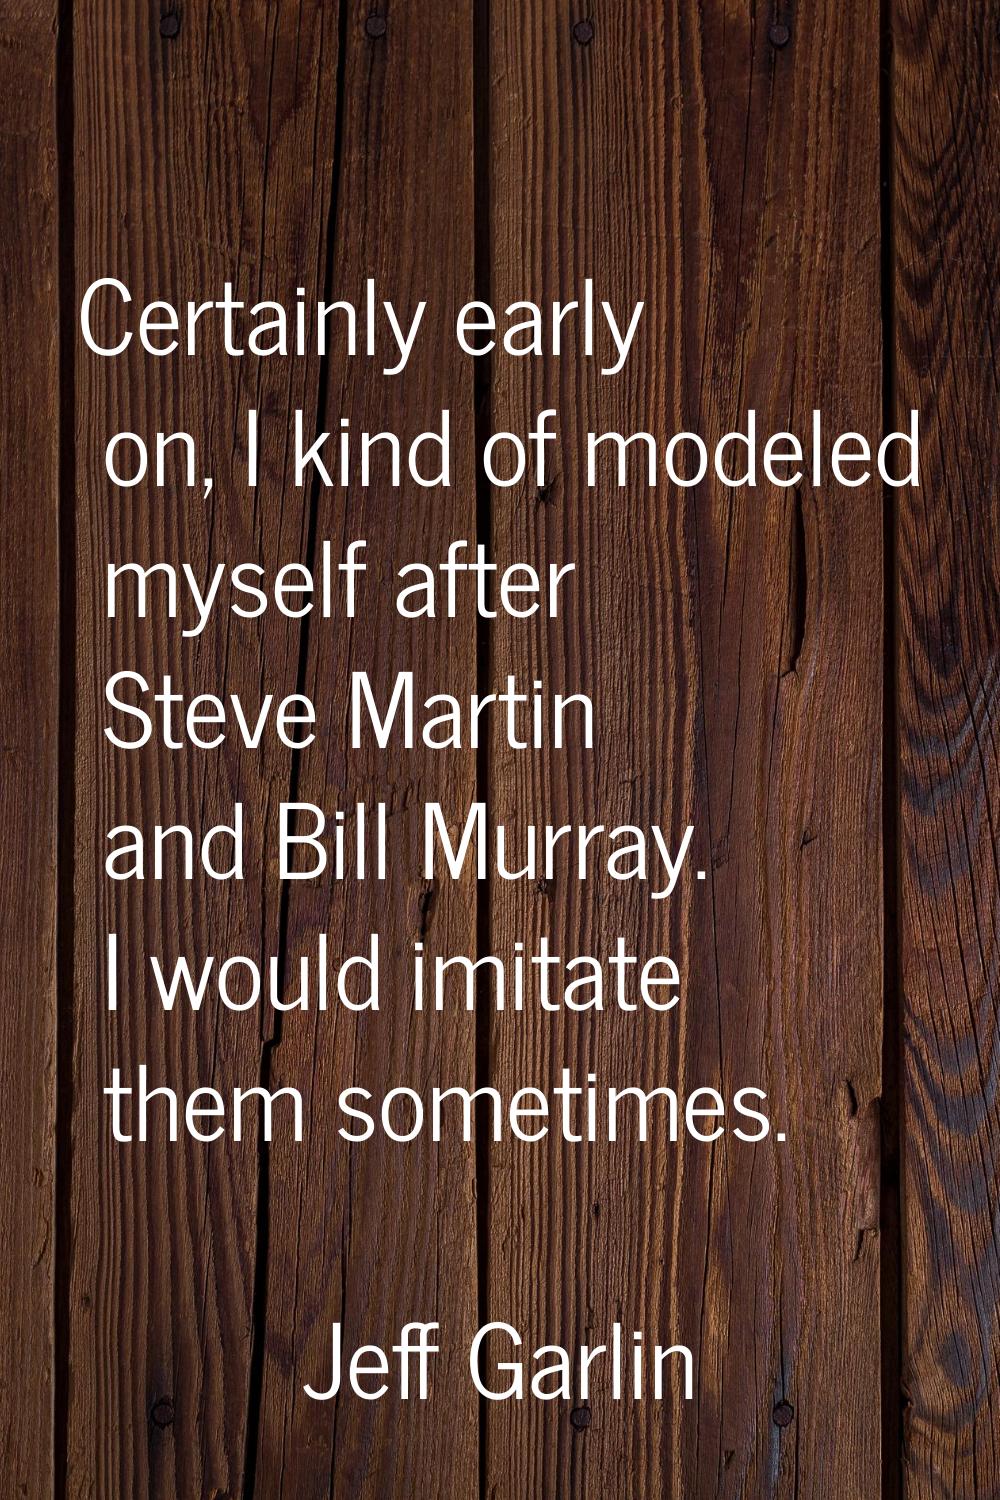 Certainly early on, I kind of modeled myself after Steve Martin and Bill Murray. I would imitate th